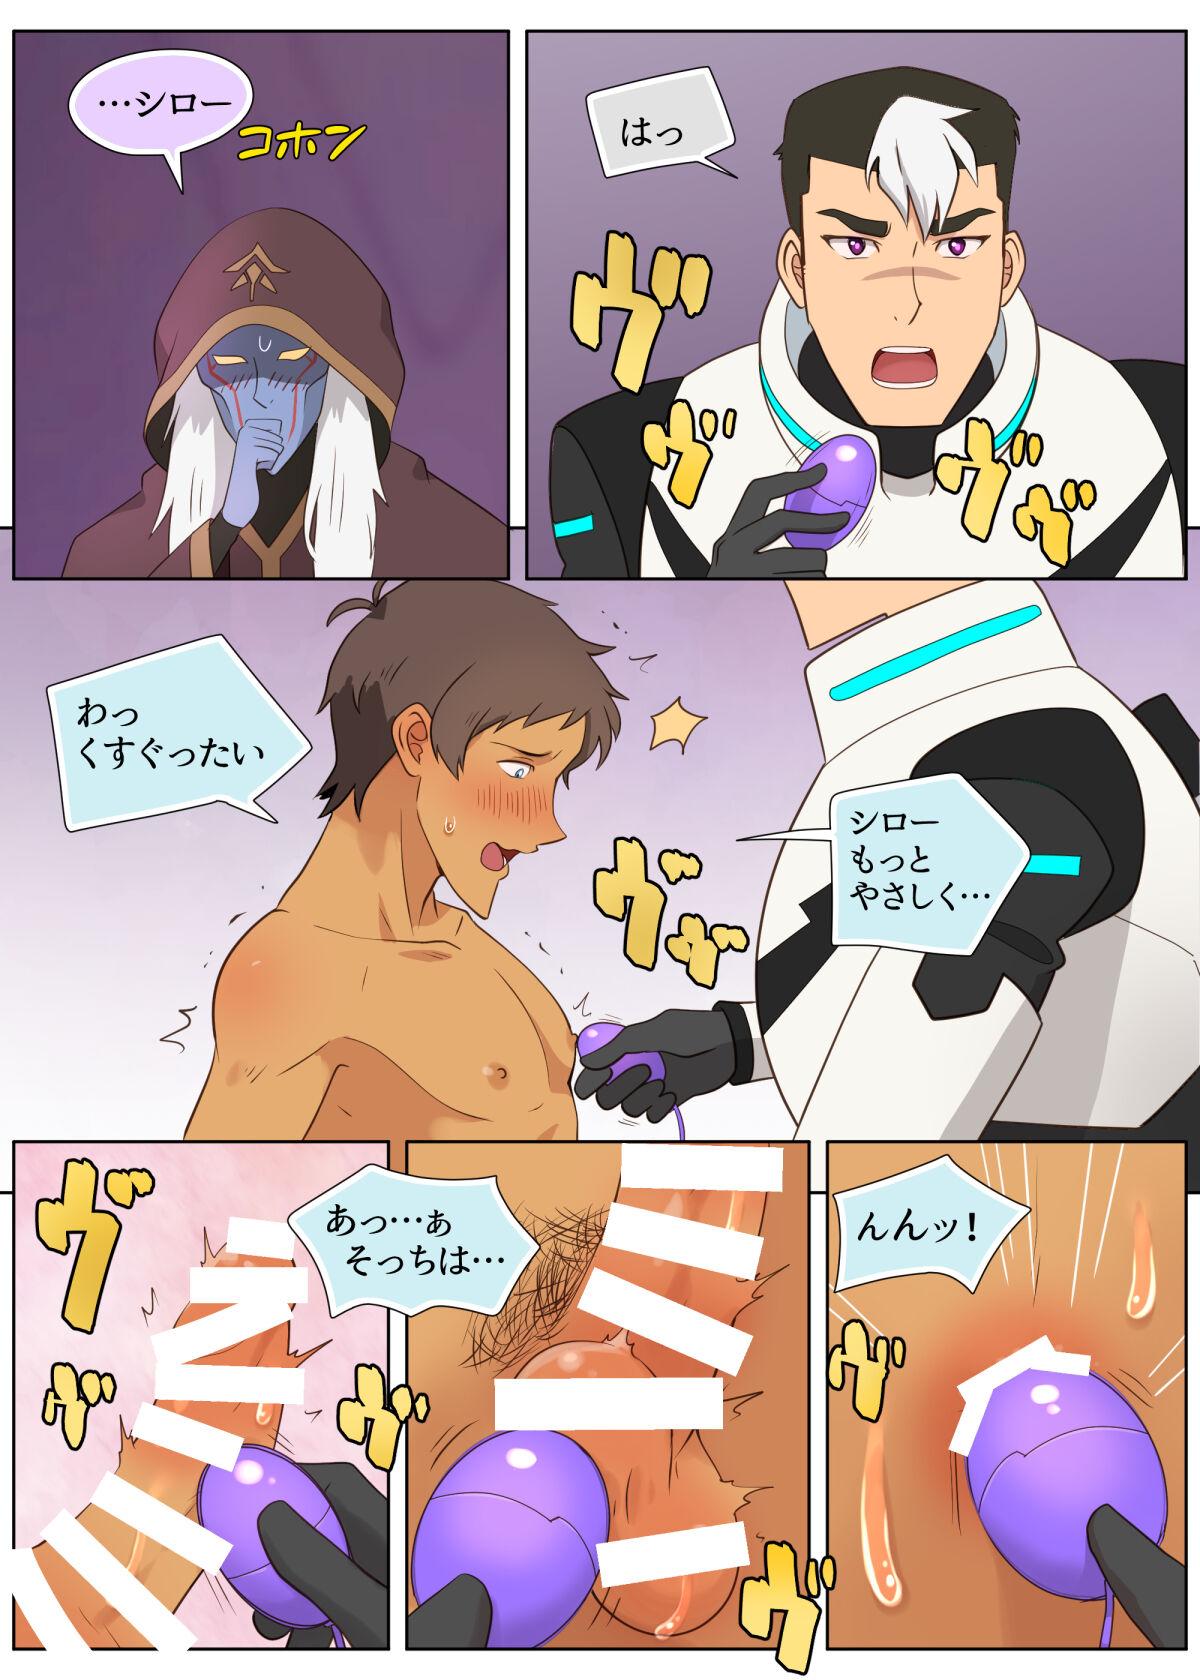 Tits ハガー様のおもちゃ! - Voltron Camgirl - Page 10